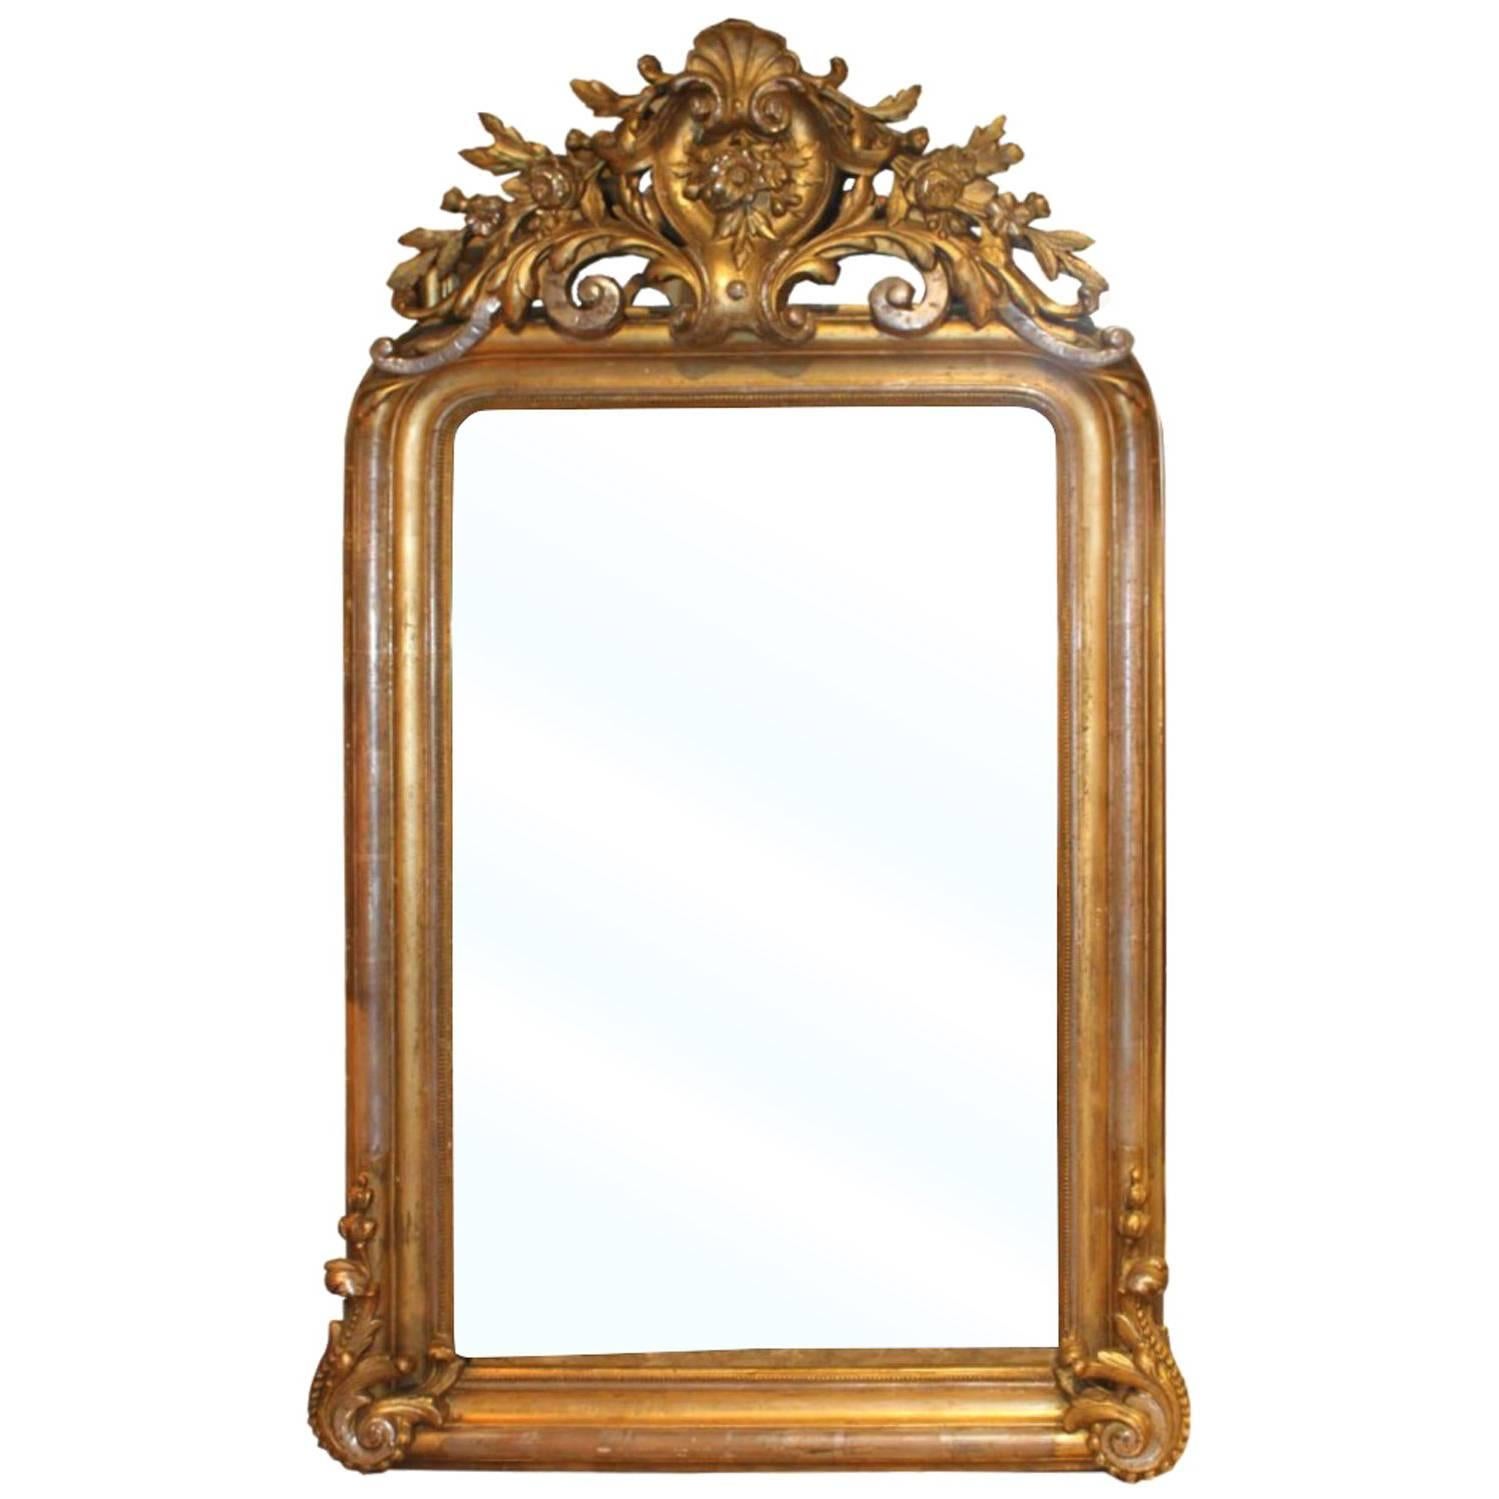 French Louis XVI Style Gilt and Silvered Mirror with Carved Crest, 19th Century